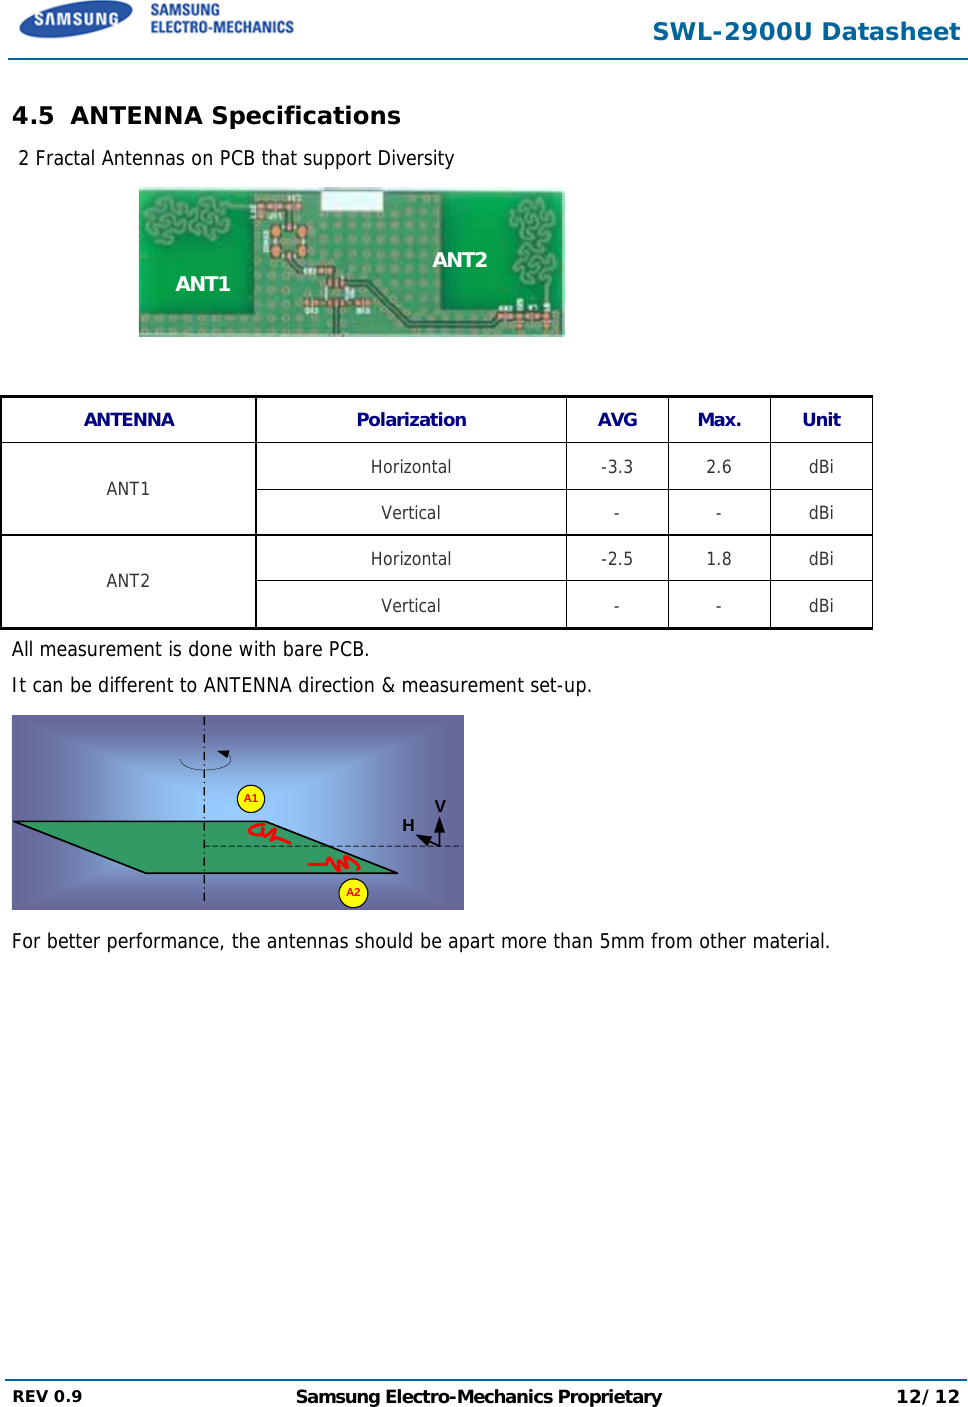  SWL-2900U Datasheet  REV 0.9  Samsung Electro-Mechanics Proprietary 12/12  4.5 ANTENNA Specifications  2 Fractal Antennas on PCB that support Diversity     ANTENNA Polarization AVG Max. Unit Horizontal -3.3 2.6 dBi ANT1  Vertical - - dBi Horizontal -2.5 1.8 dBi ANT2  Vertical - - dBi All measurement is done with bare PCB. It can be different to ANTENNA direction &amp; measurement set-up.  For better performance, the antennas should be apart more than 5mm from other material.  ANT1ANT2A1A2VH